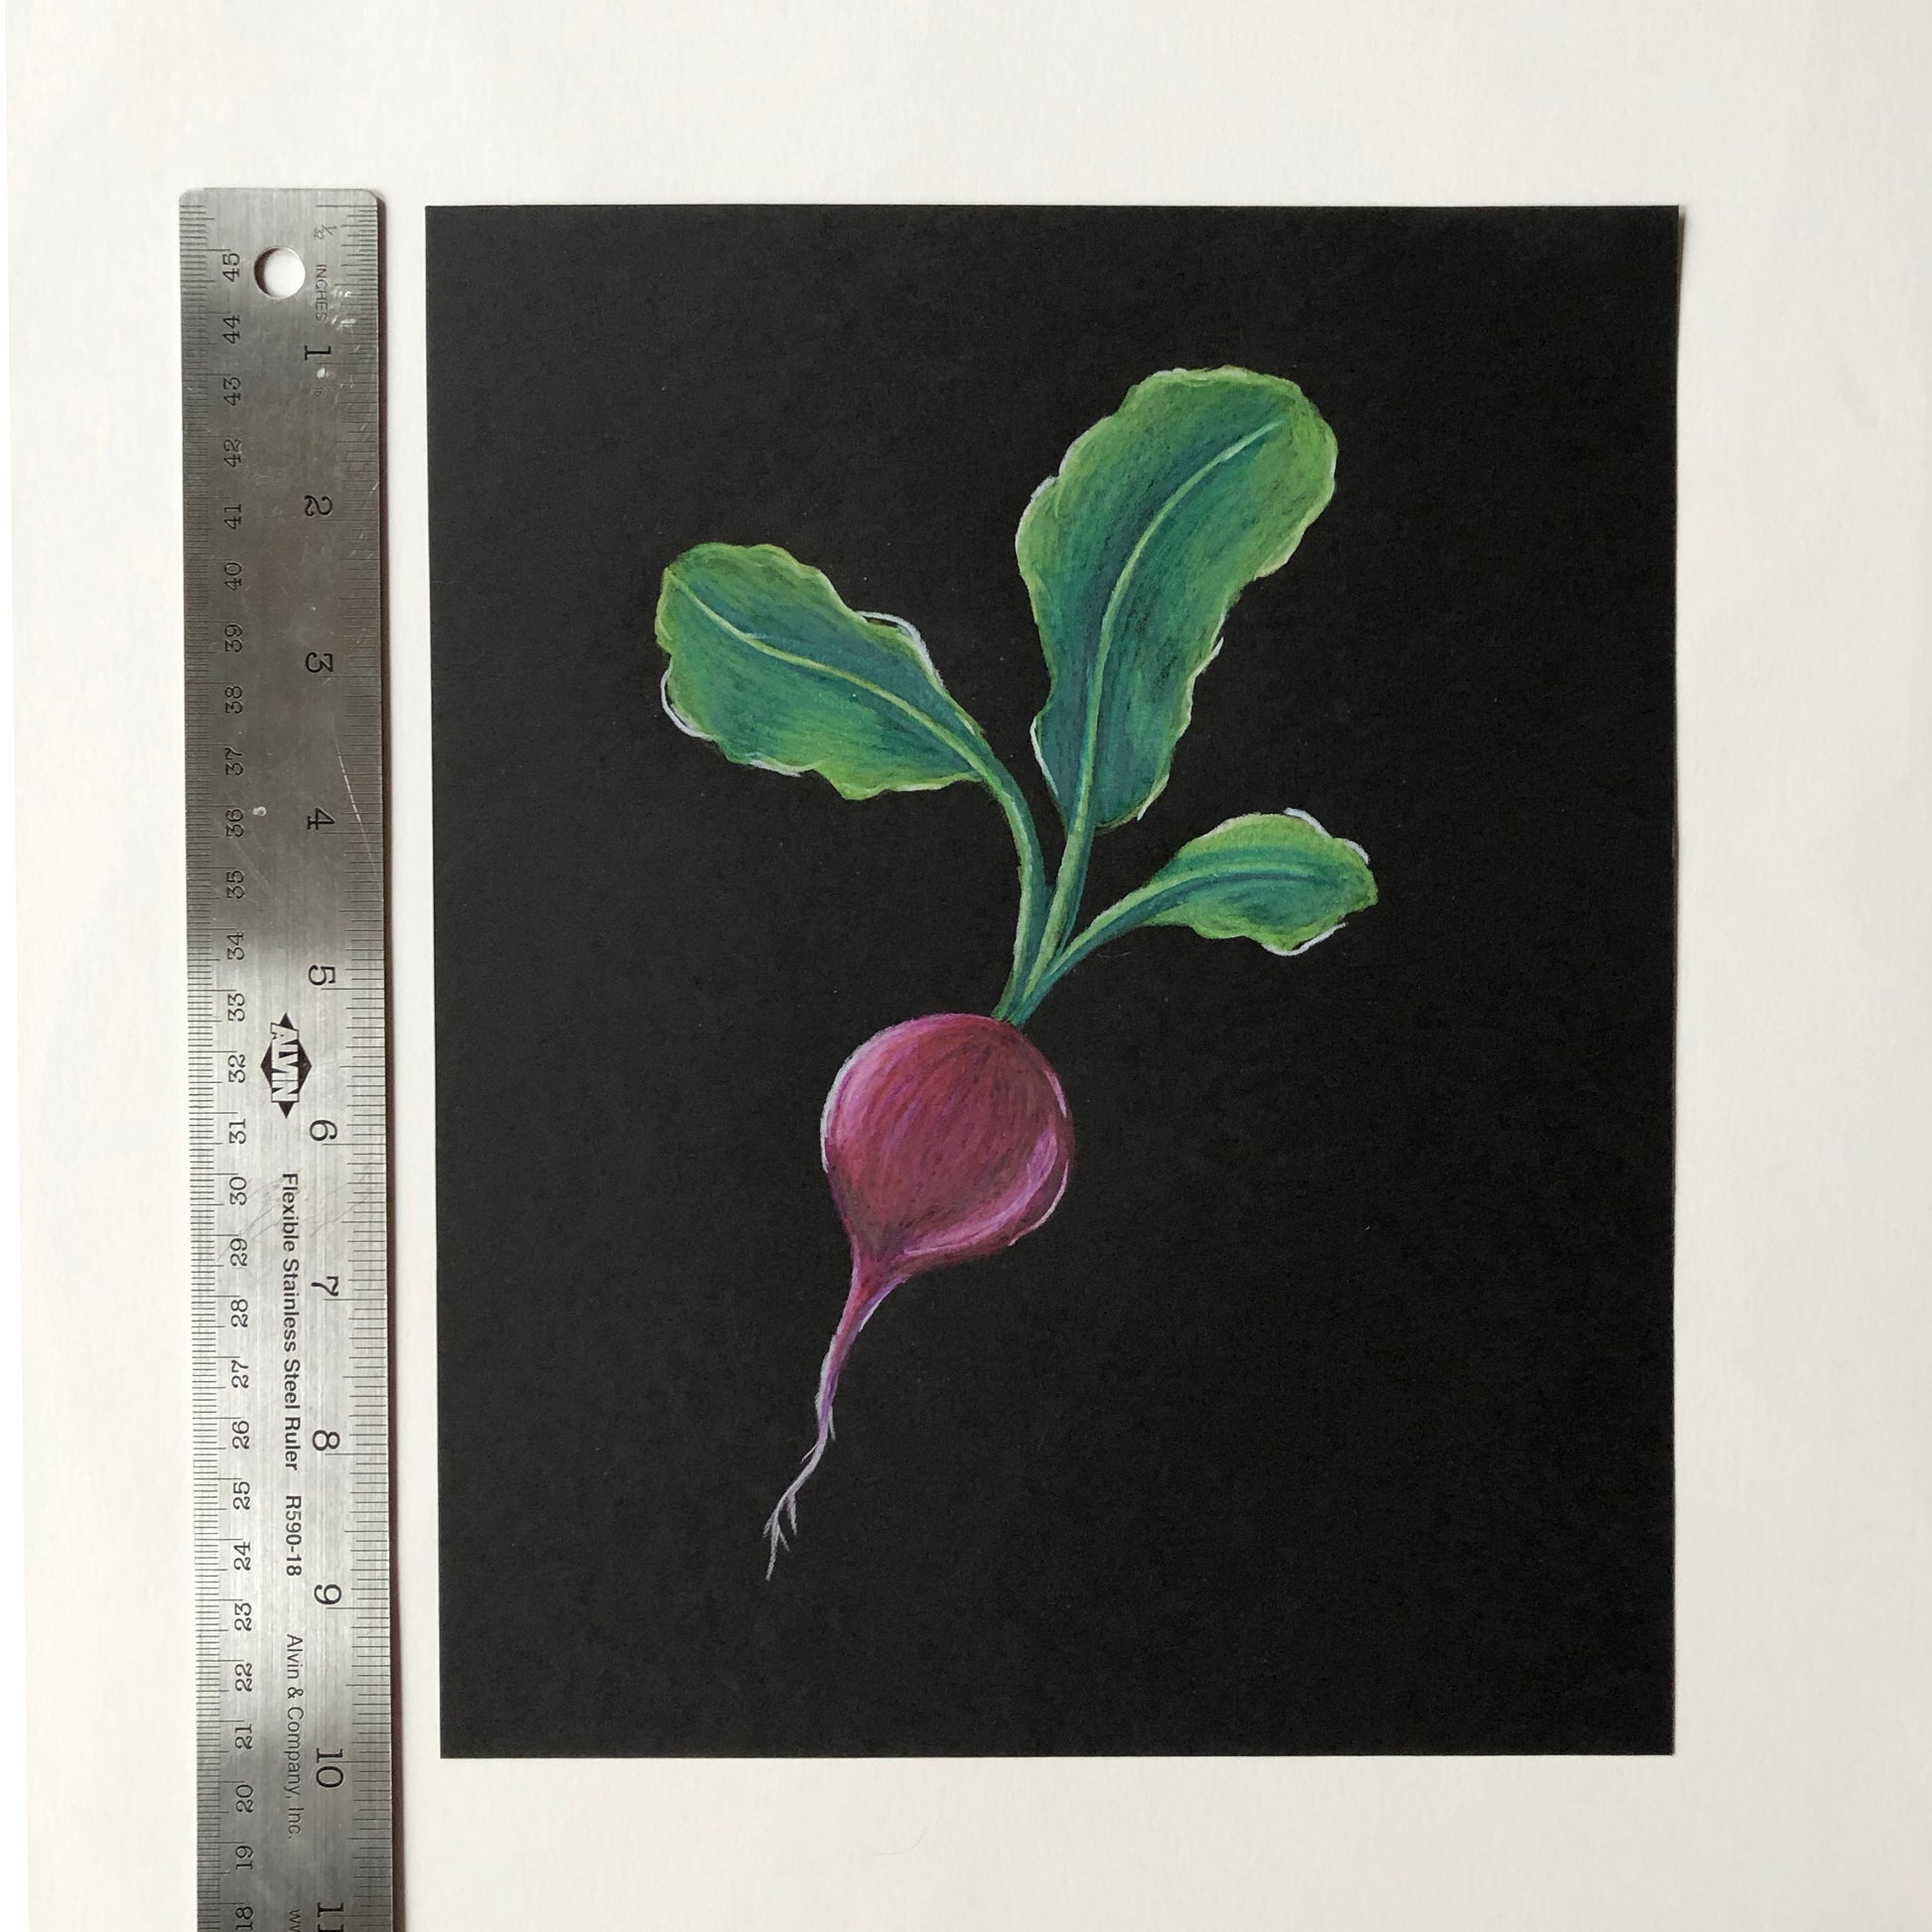 Size comparison of original colored pencil drawing of a beat on black paper by illustrator, Tia Hapner, next to a ruler sized at 10 inches high.